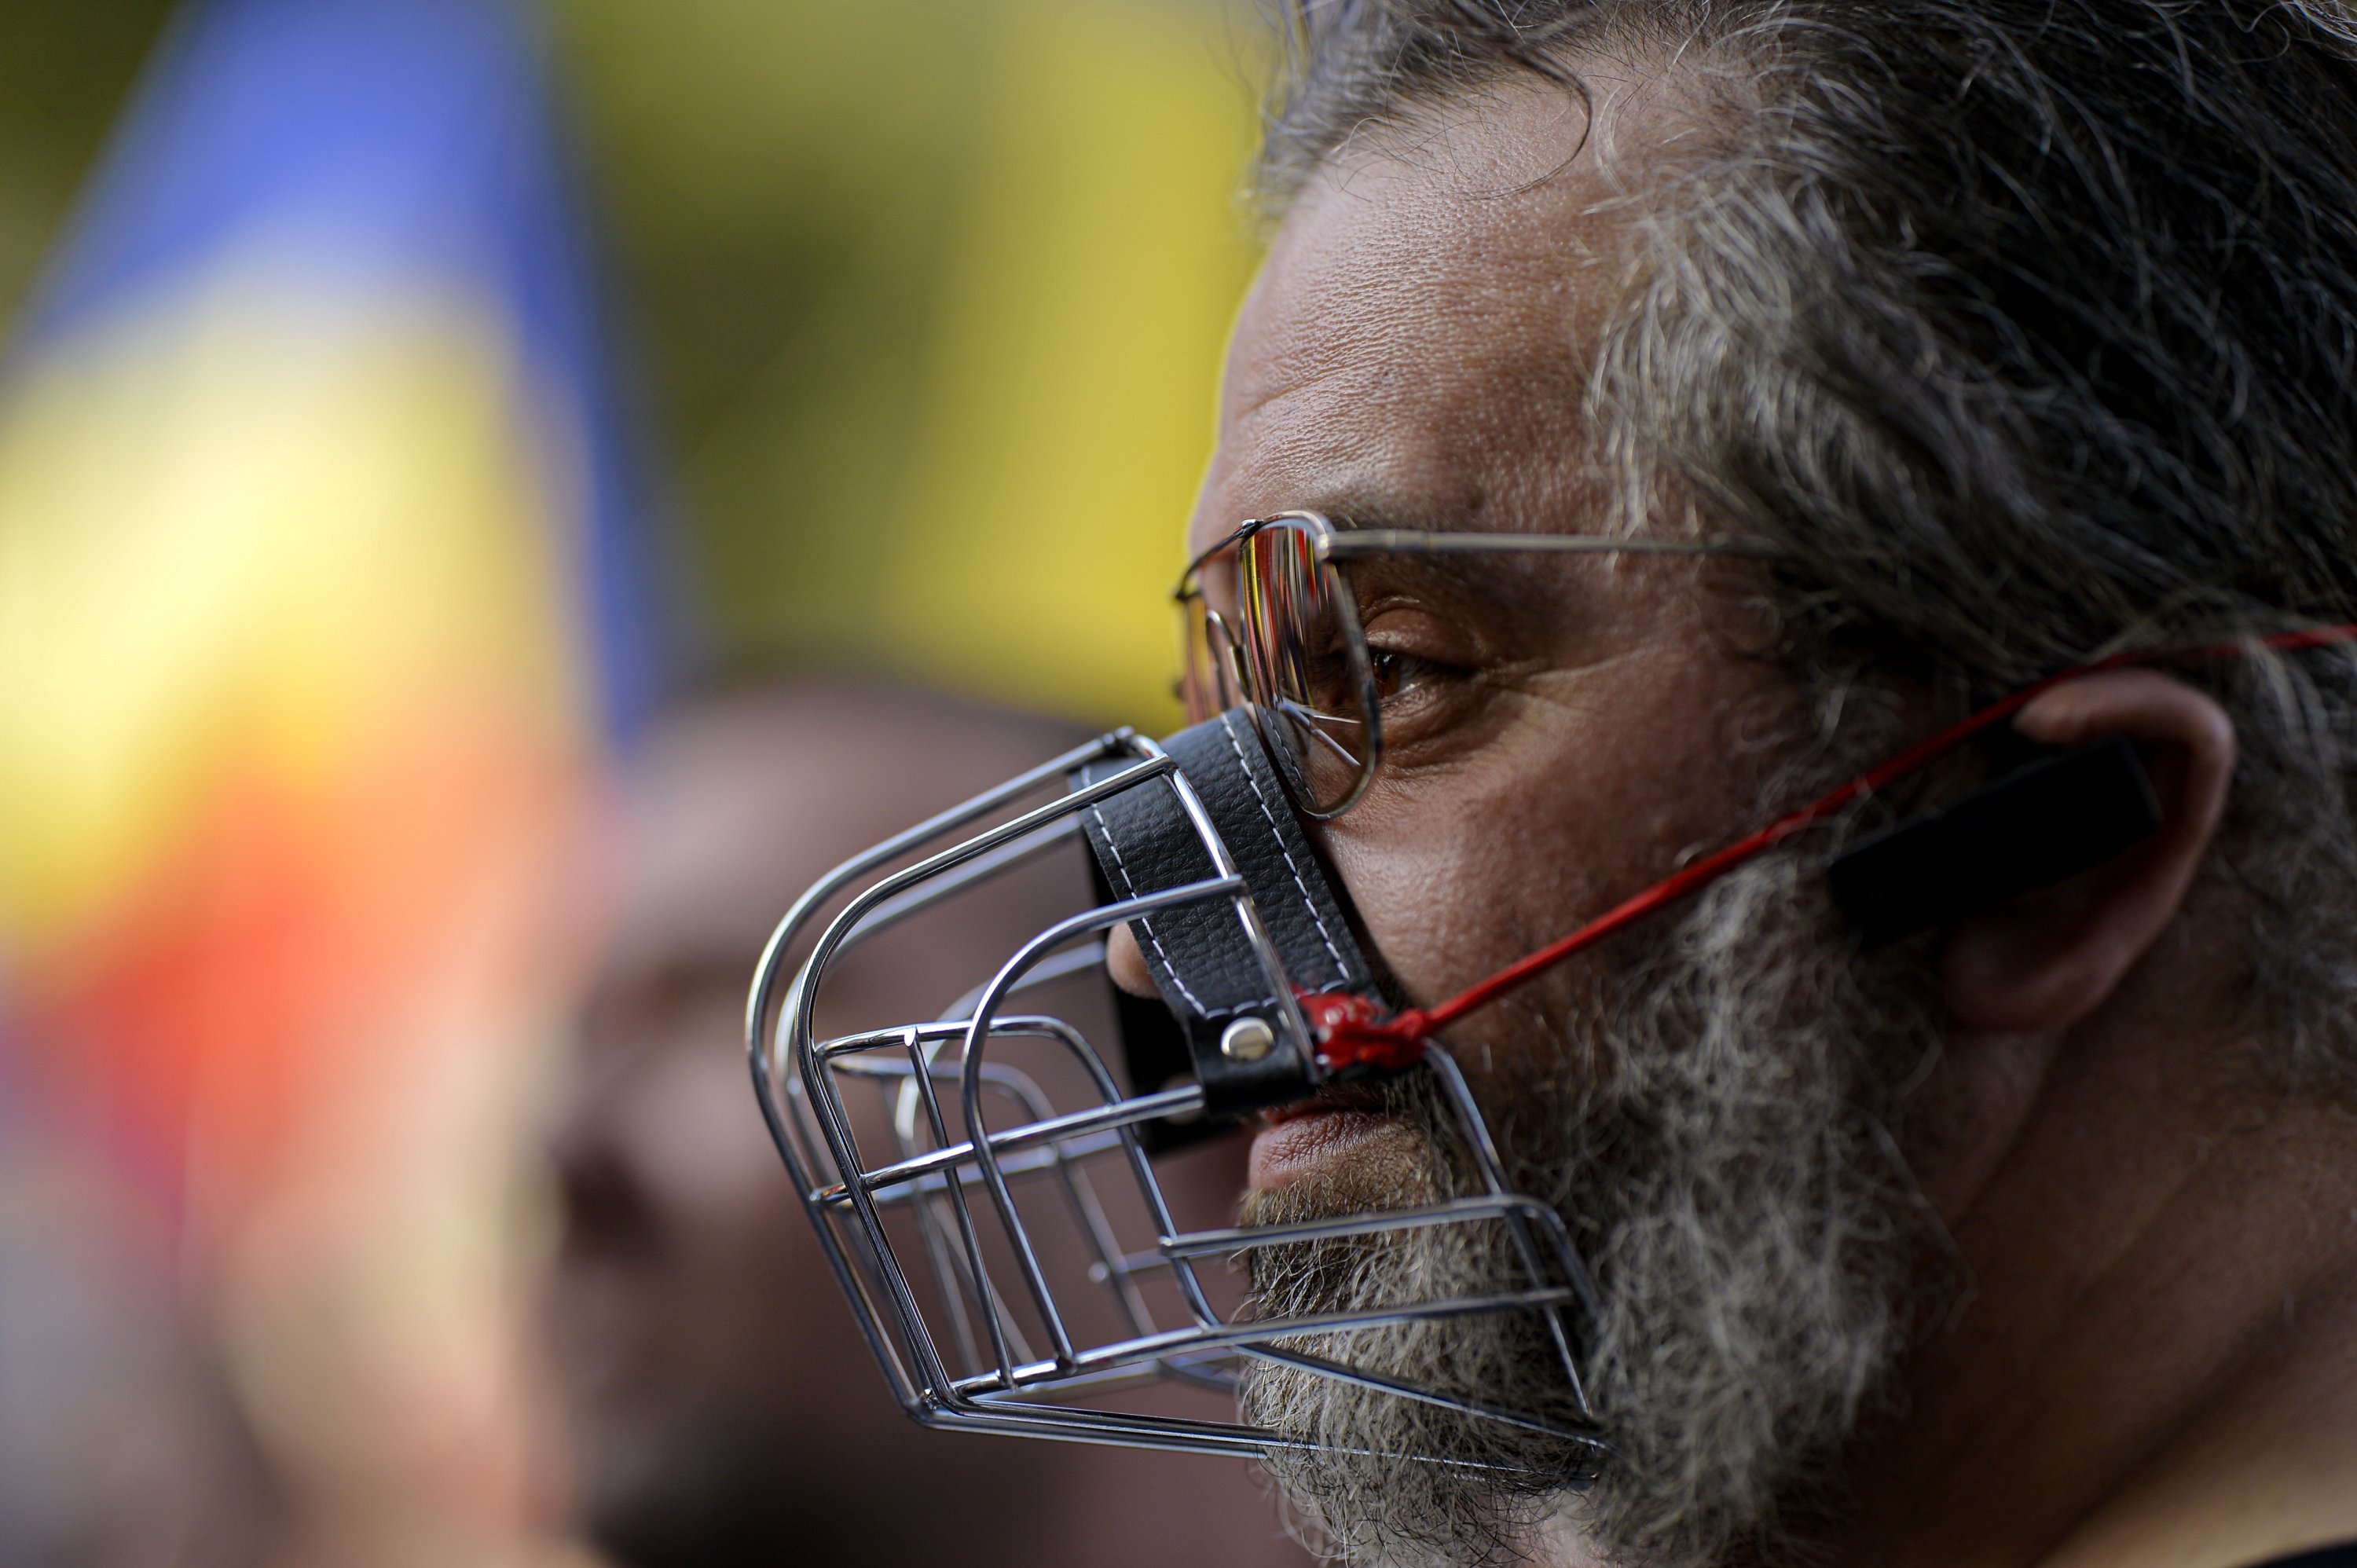 A man wears a muzzle during a protest in Bucharest, Romania, Saturday, Sept. 19, 2020. (AP Photo)